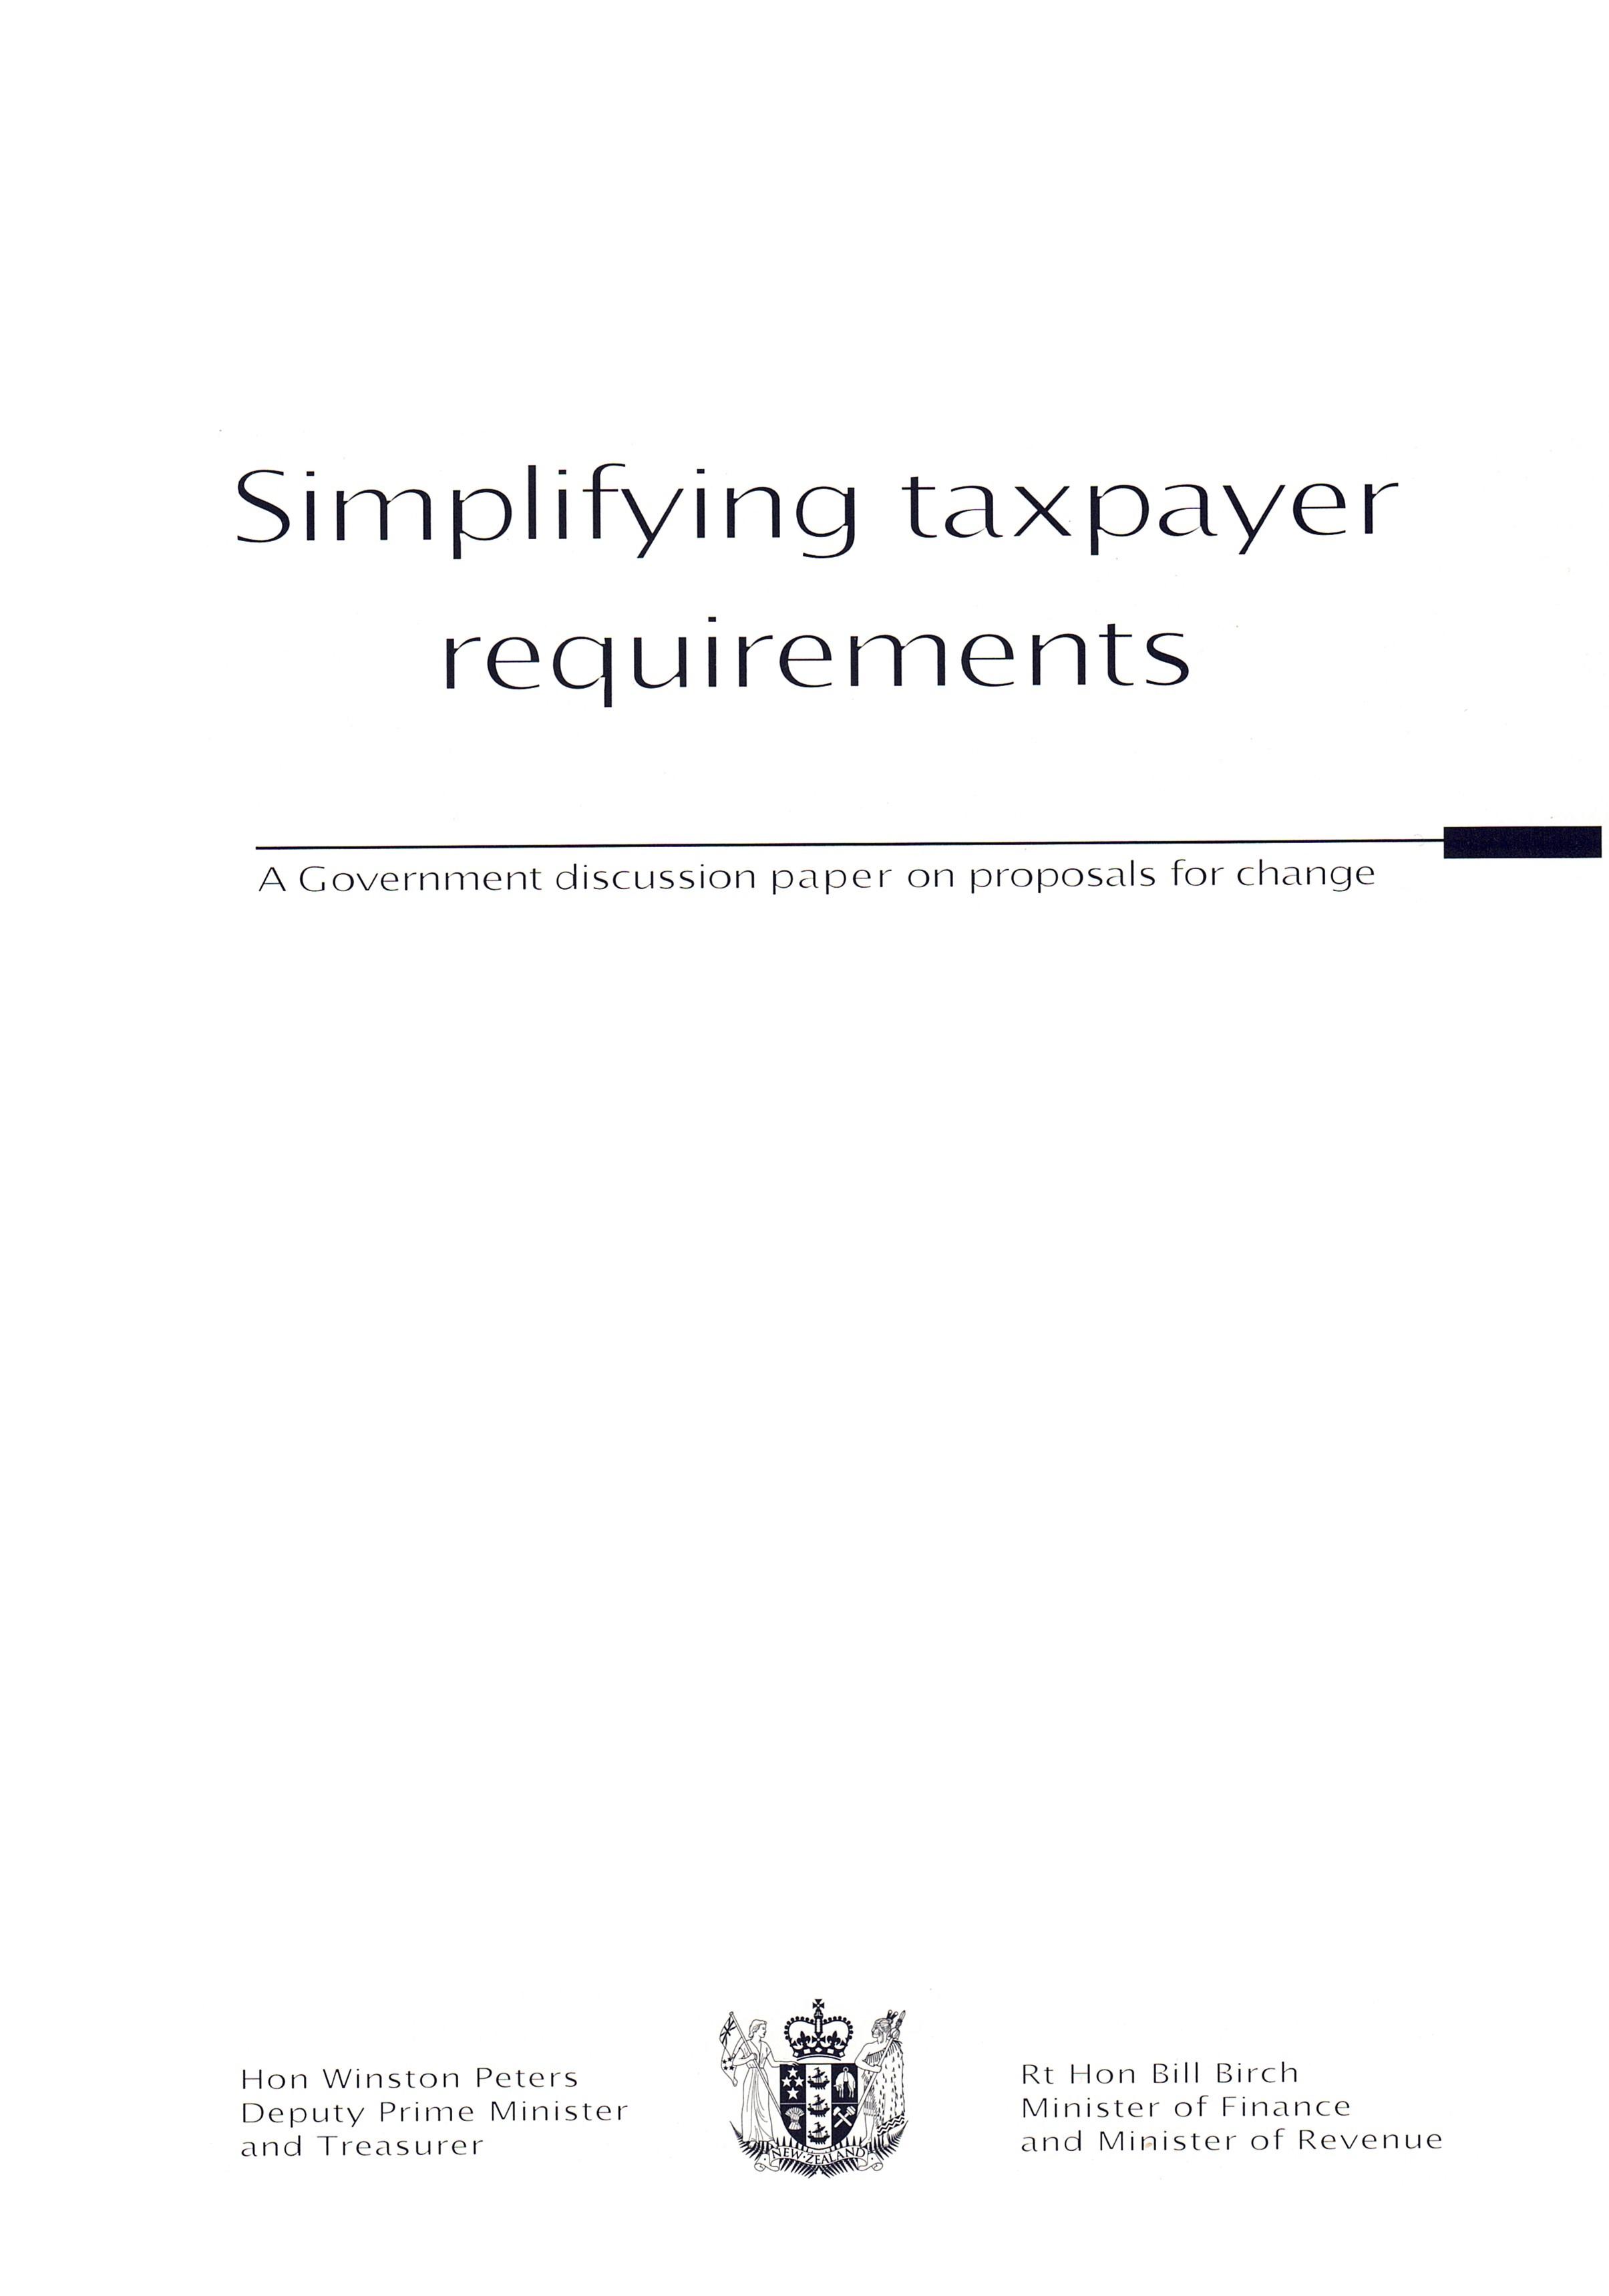 Cover page for publication. Title = Simplifying taxpayer requirements: A Government discussion paper on proposals for change. December 1997